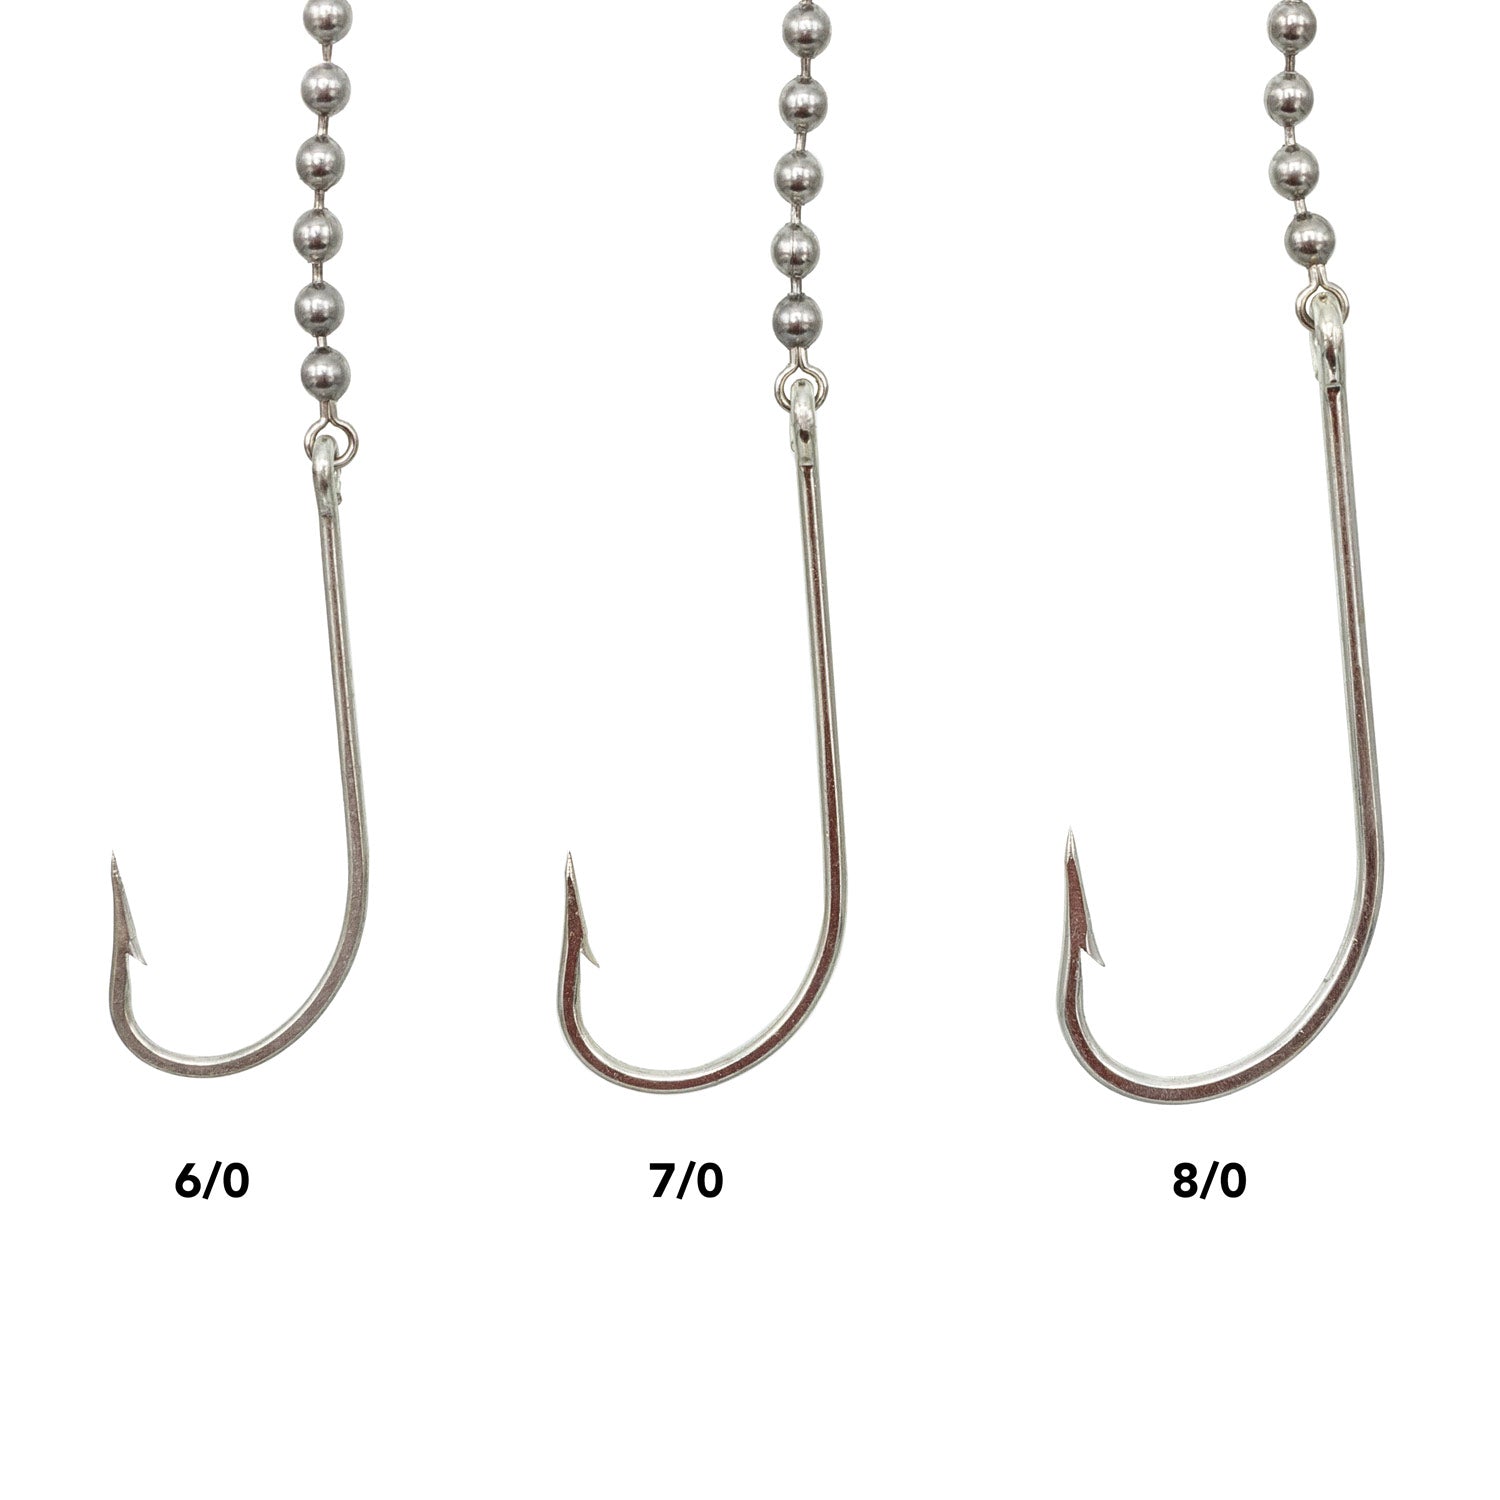 Rite Angler Bead Chain Rig Sizes